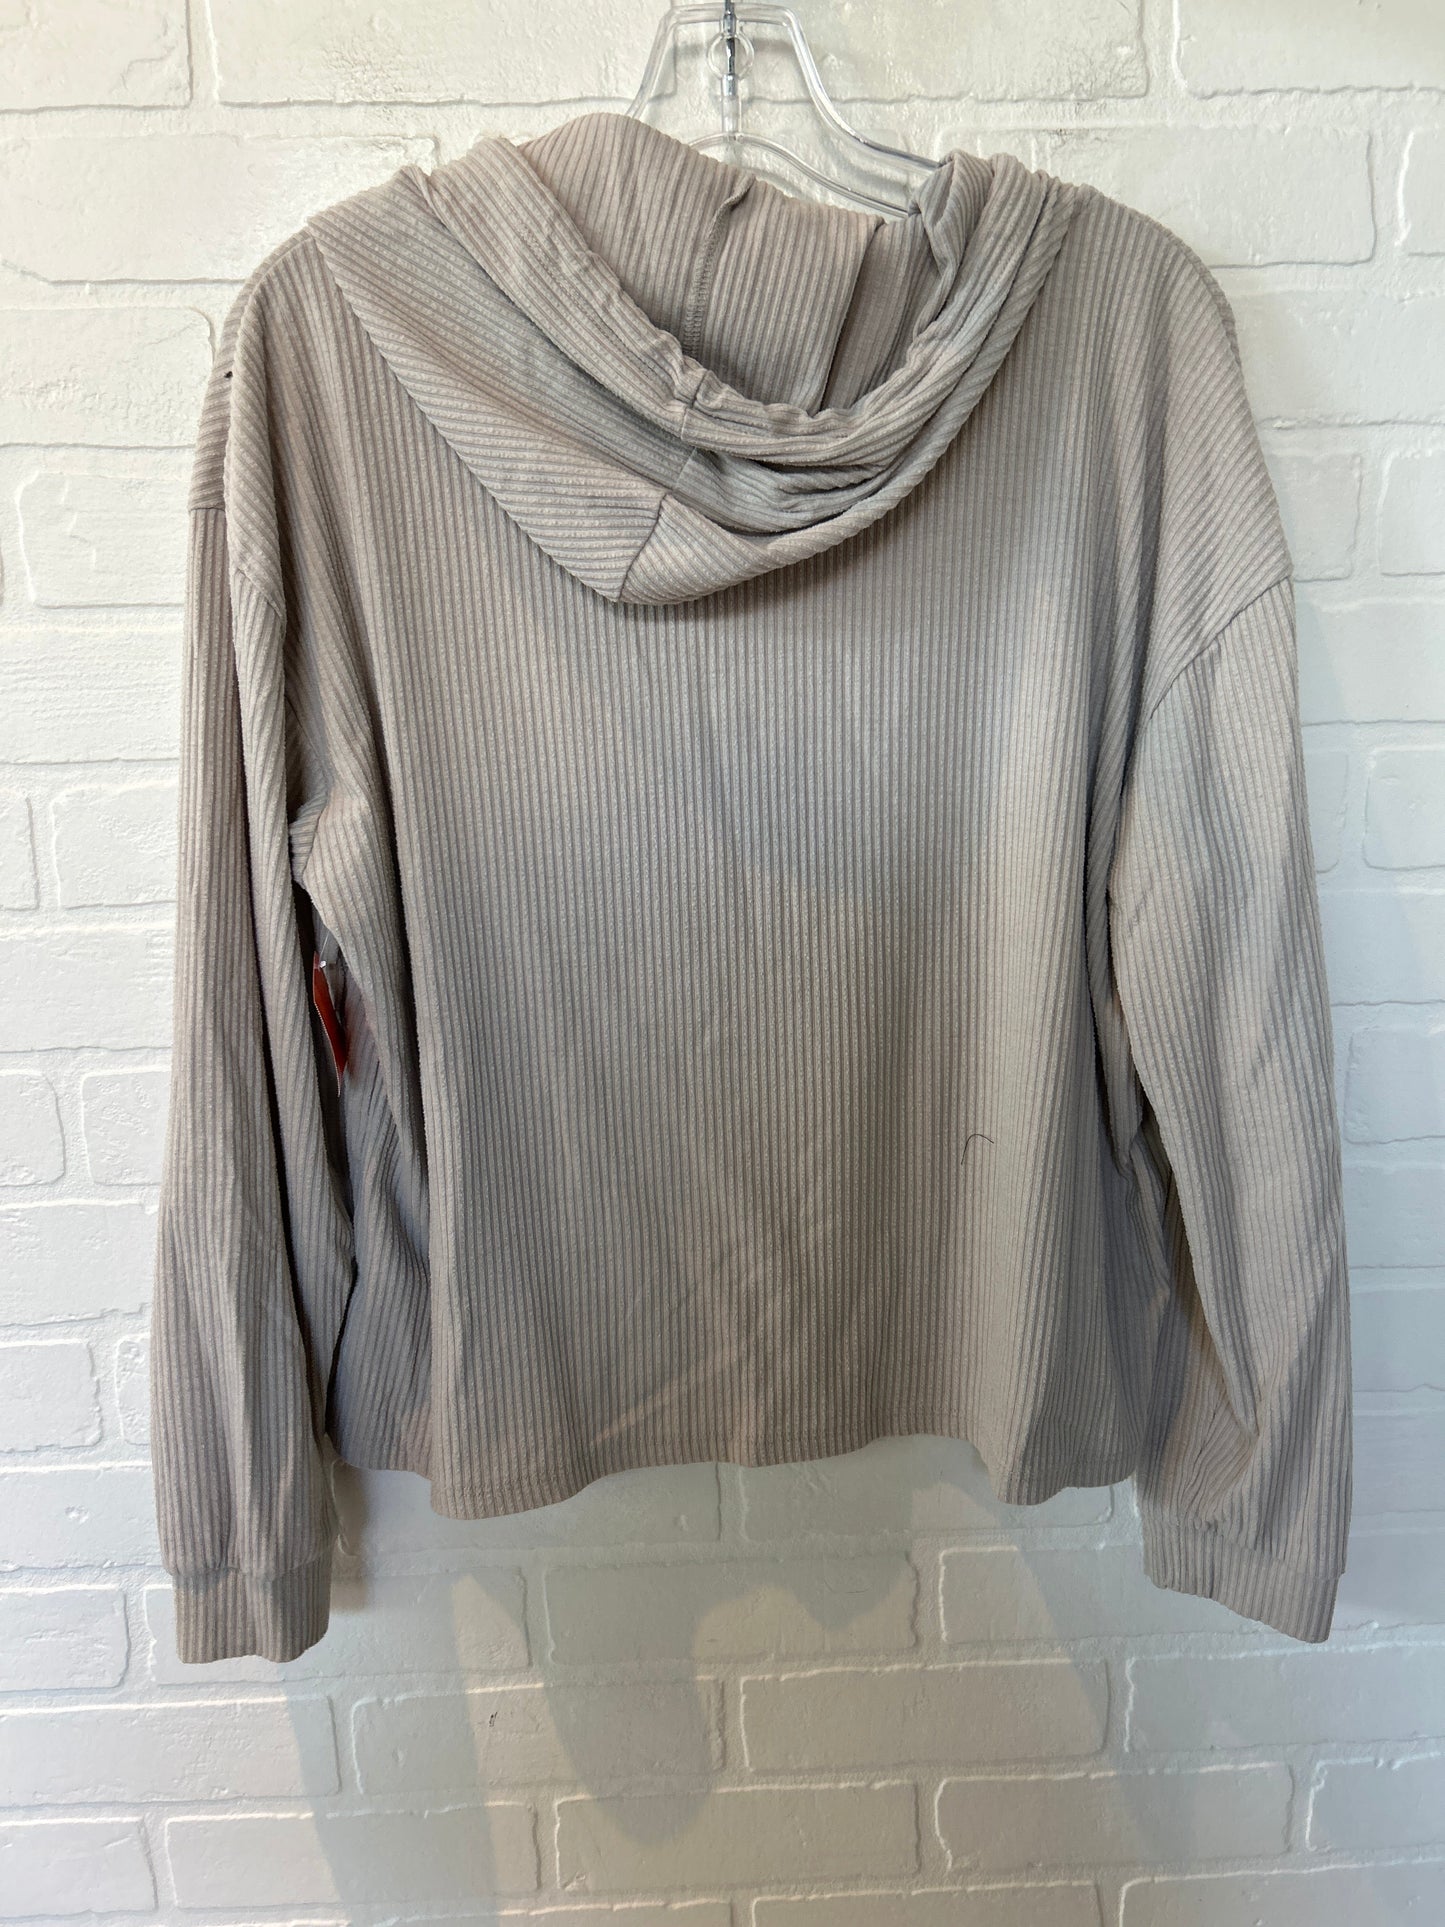 Beige Top Long Sleeve C And C, Size L